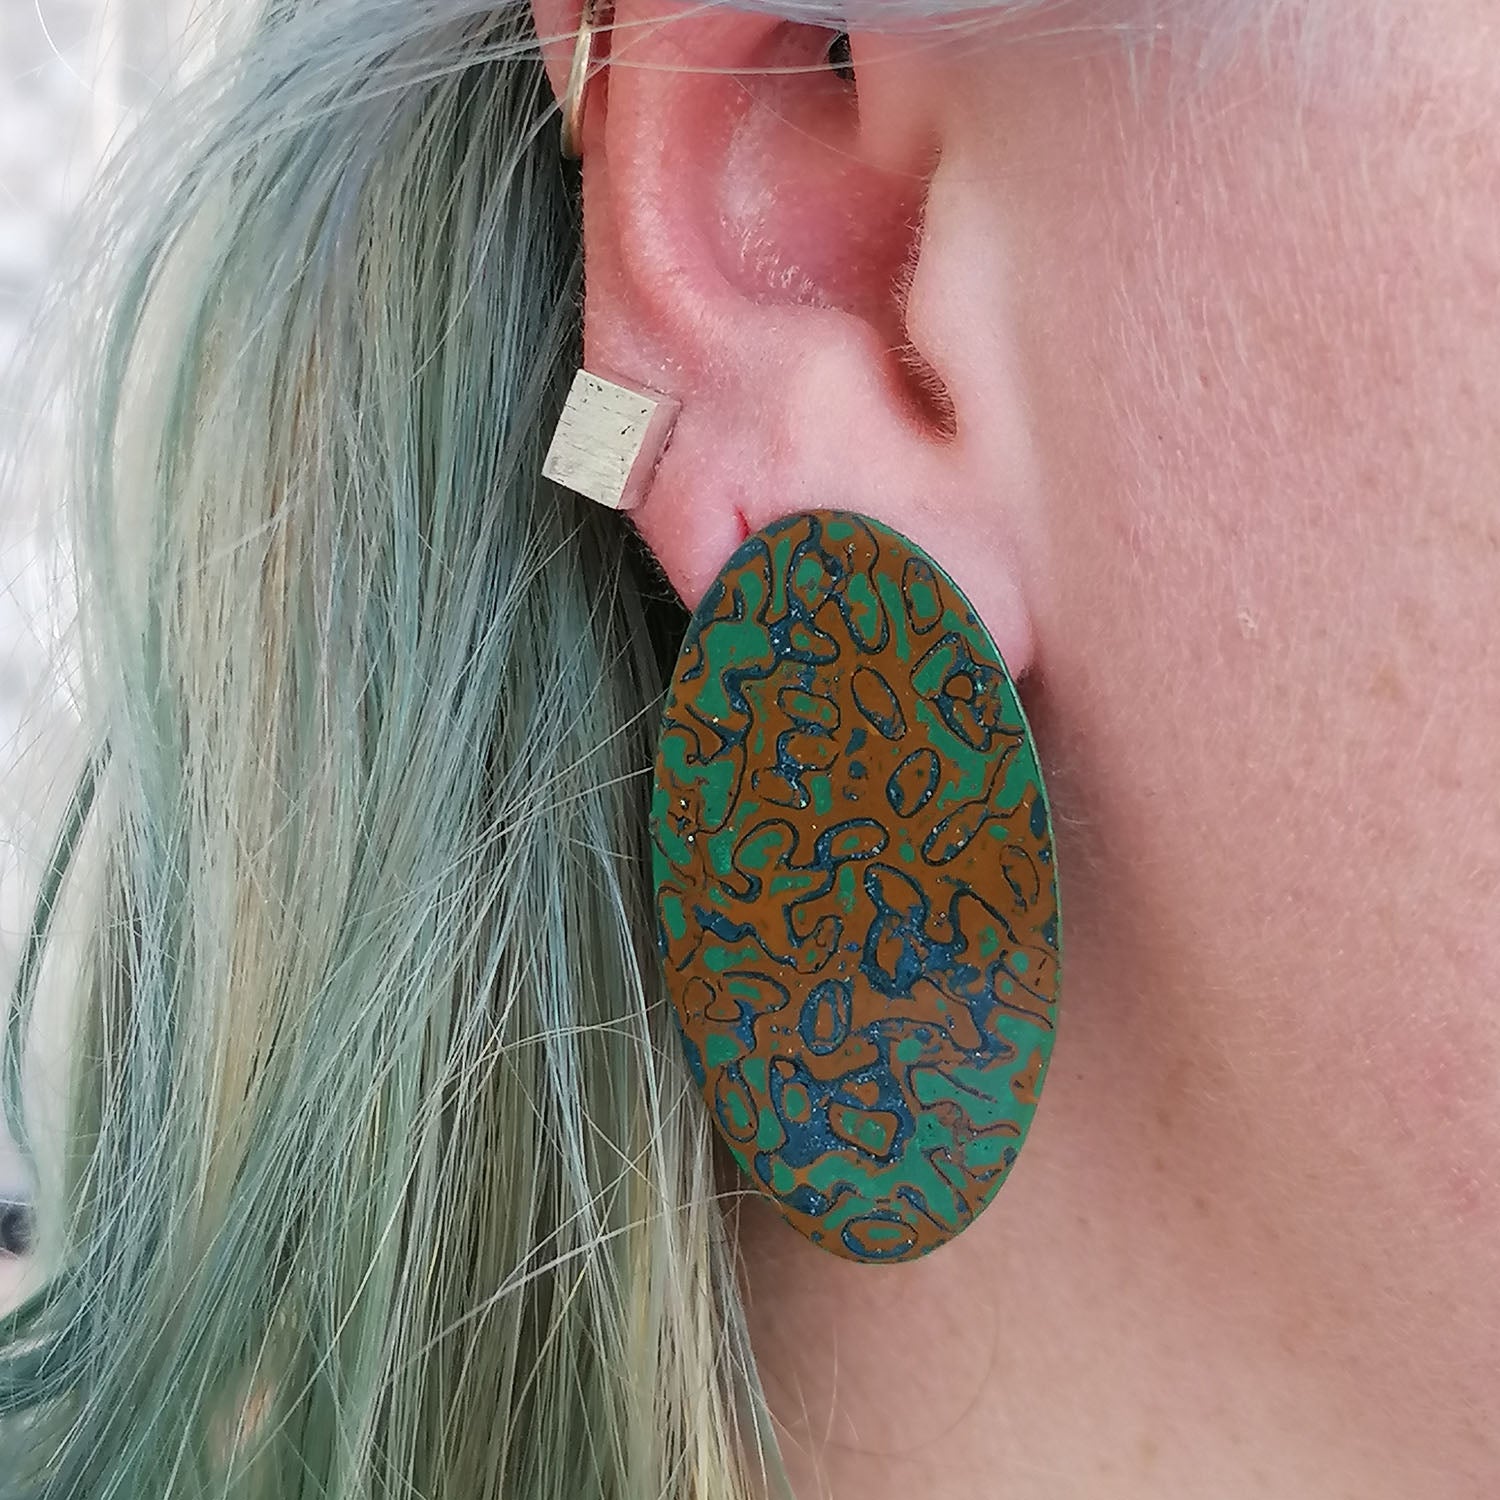 Image shows a single long sleek and shiny statement oval earring being worn by a blue haired model. Abstract pattern in ochre yellow, green and blue